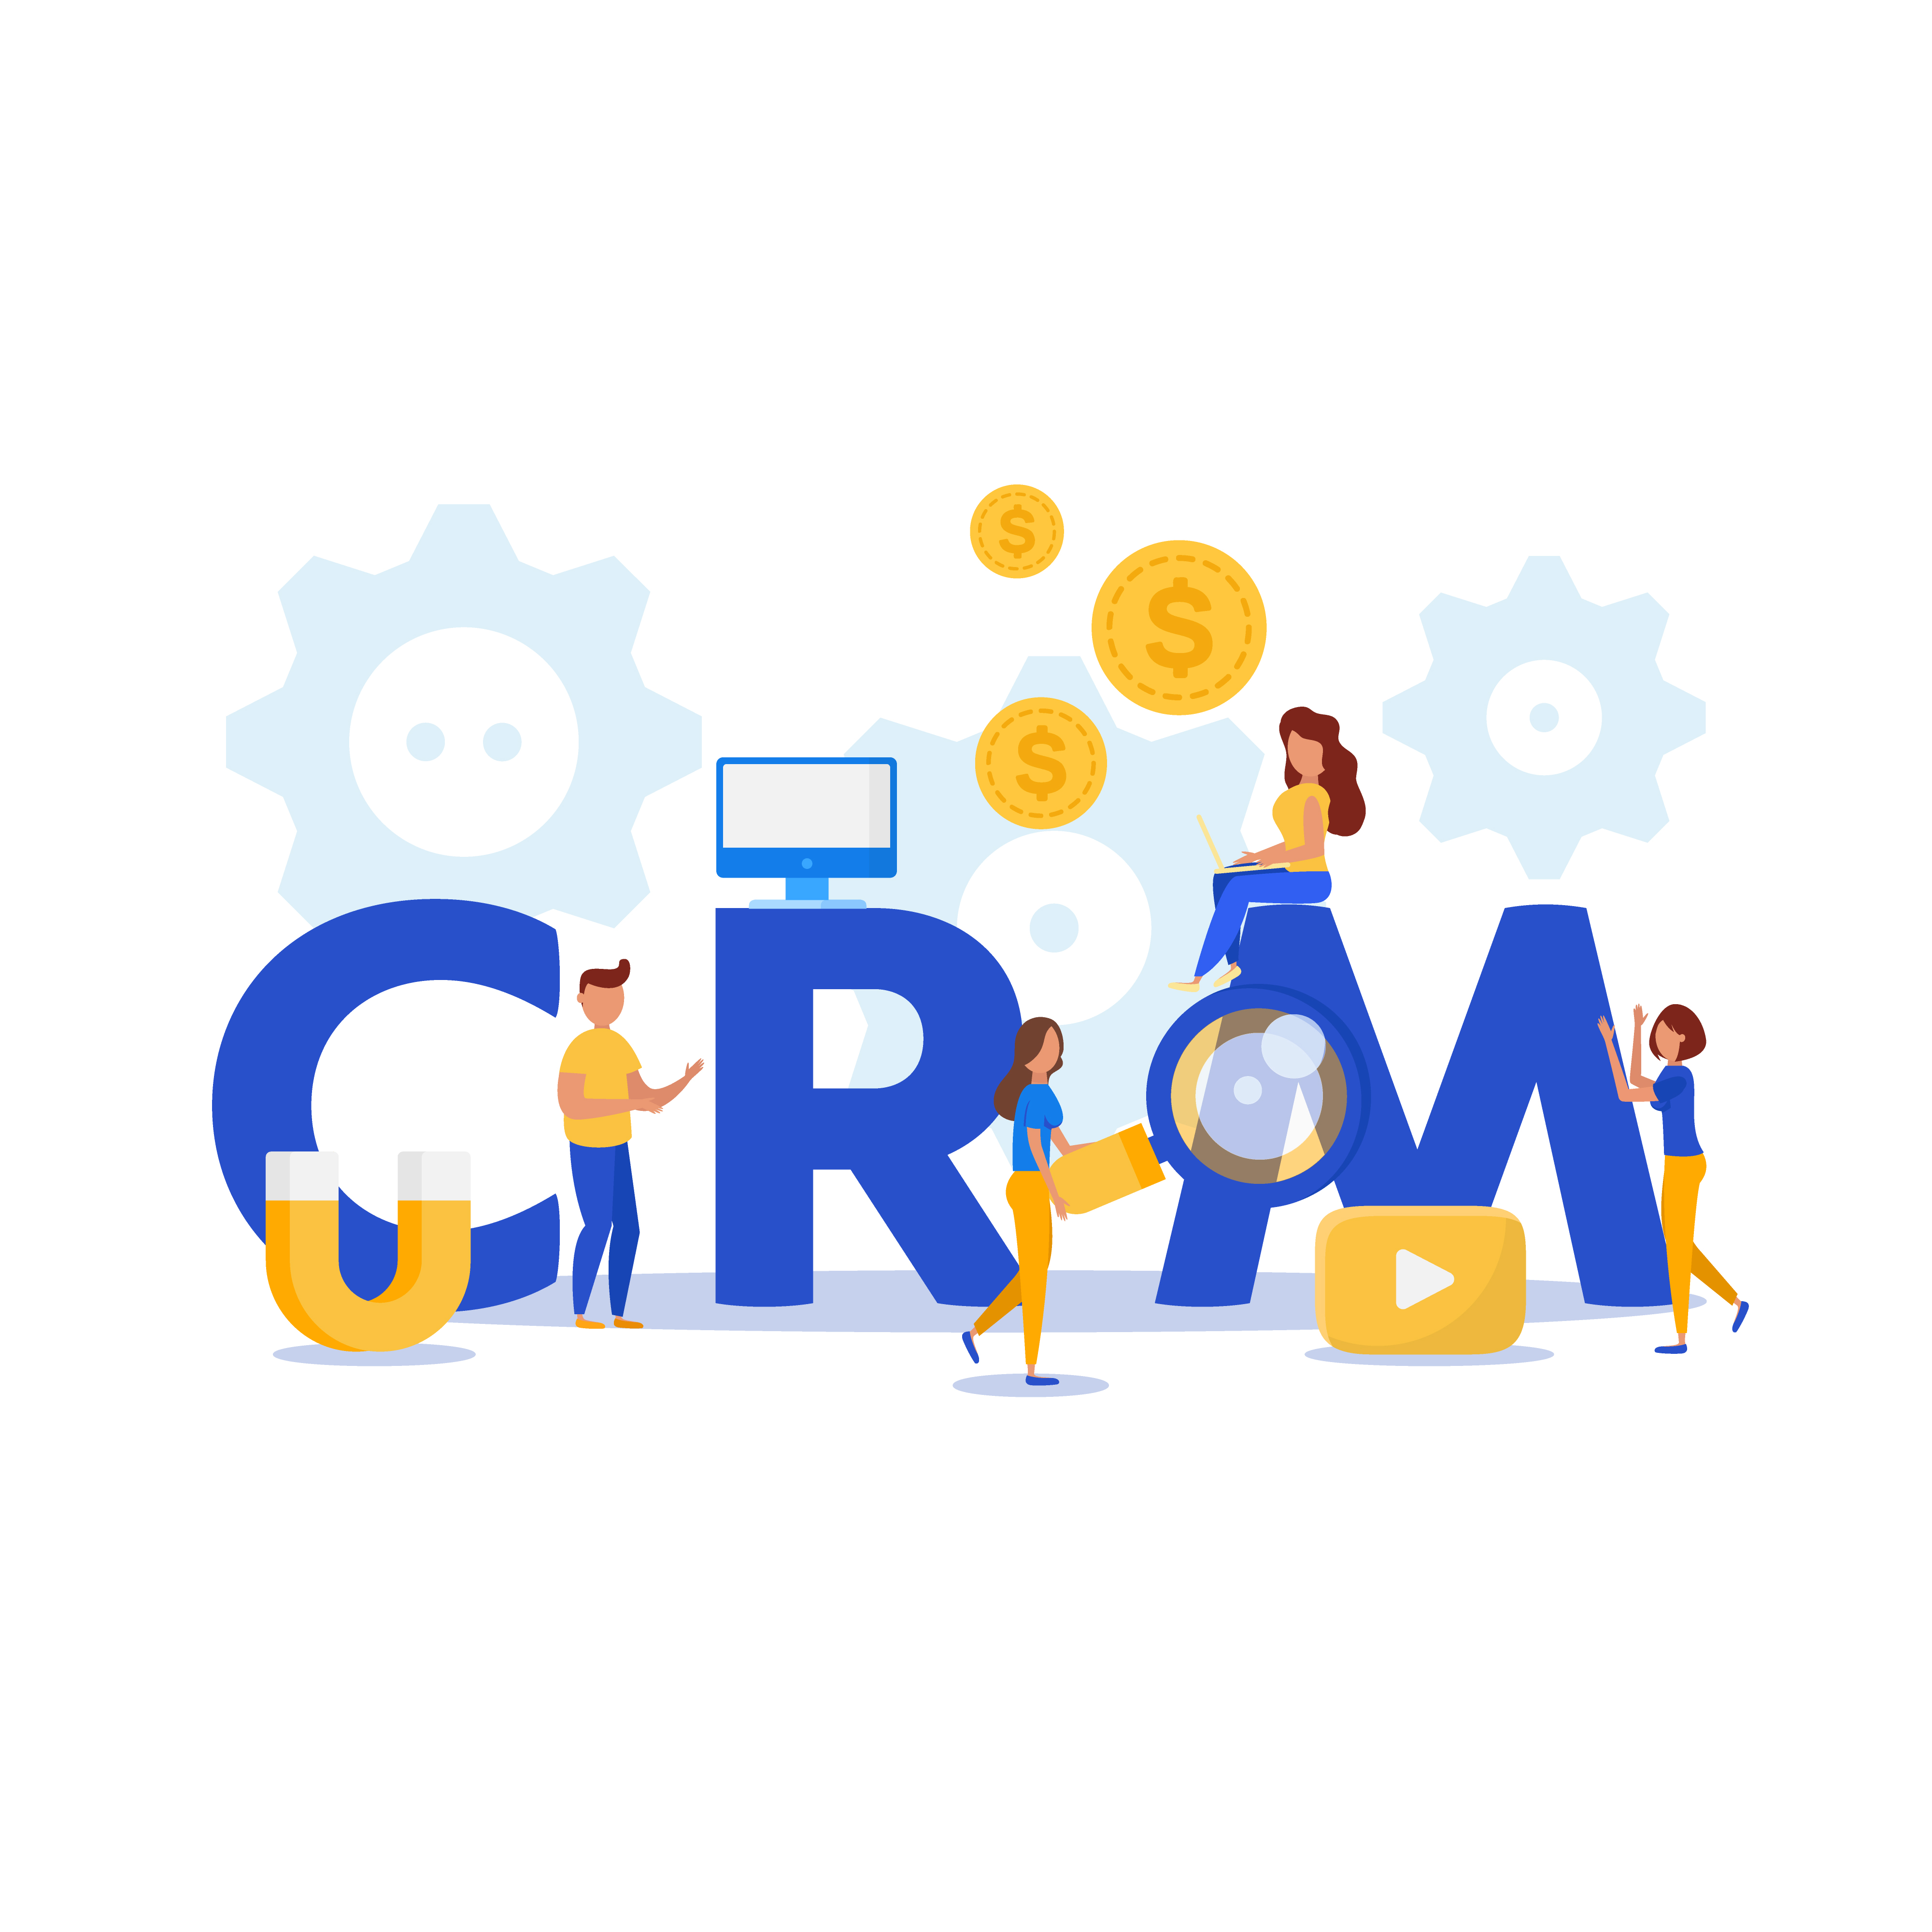 How to develop a custom CRM